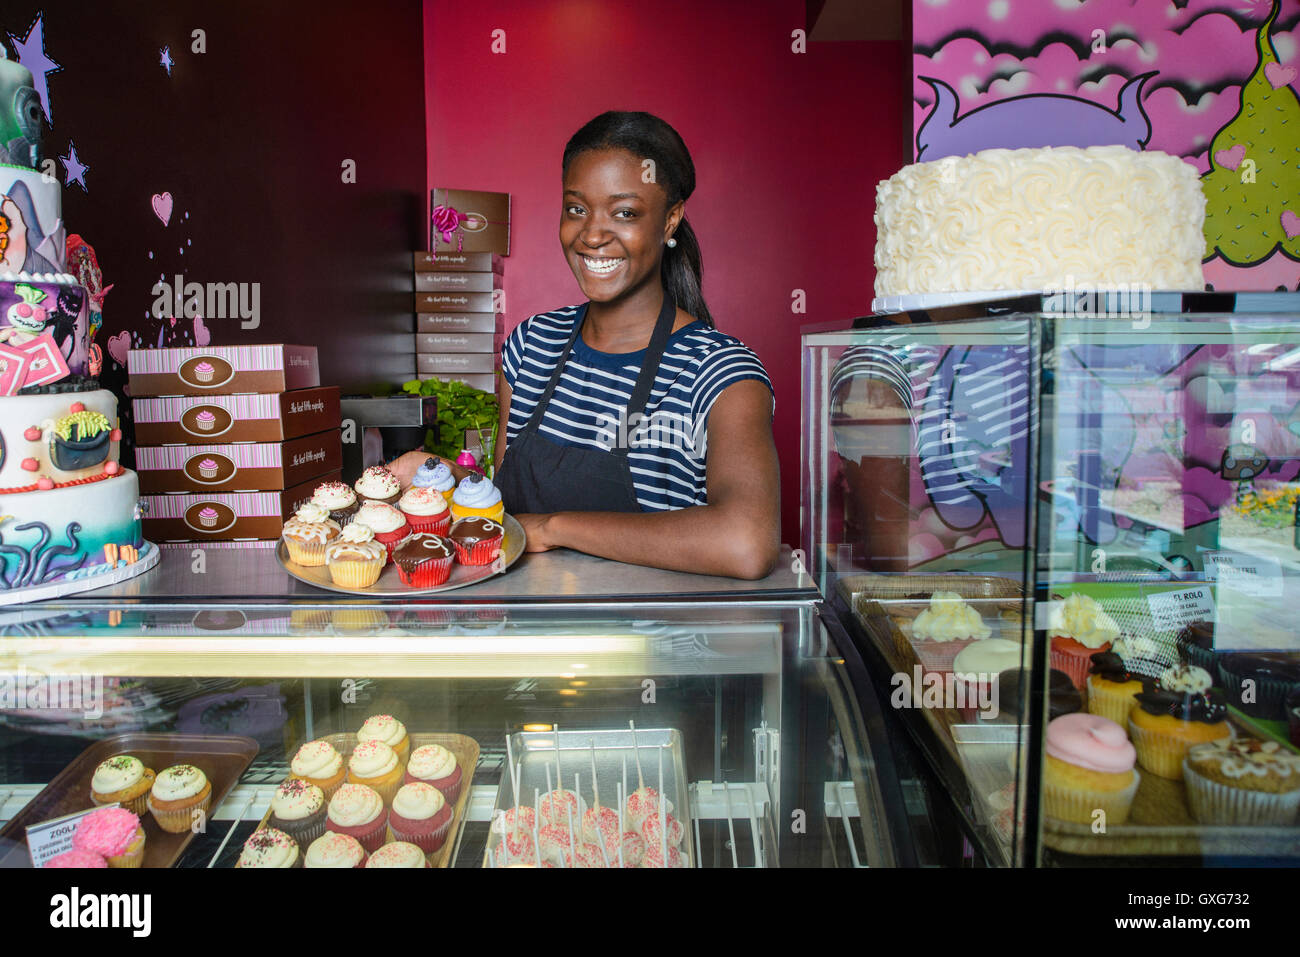 Black business owner showing cupcakes at bakery display case Stock Photo